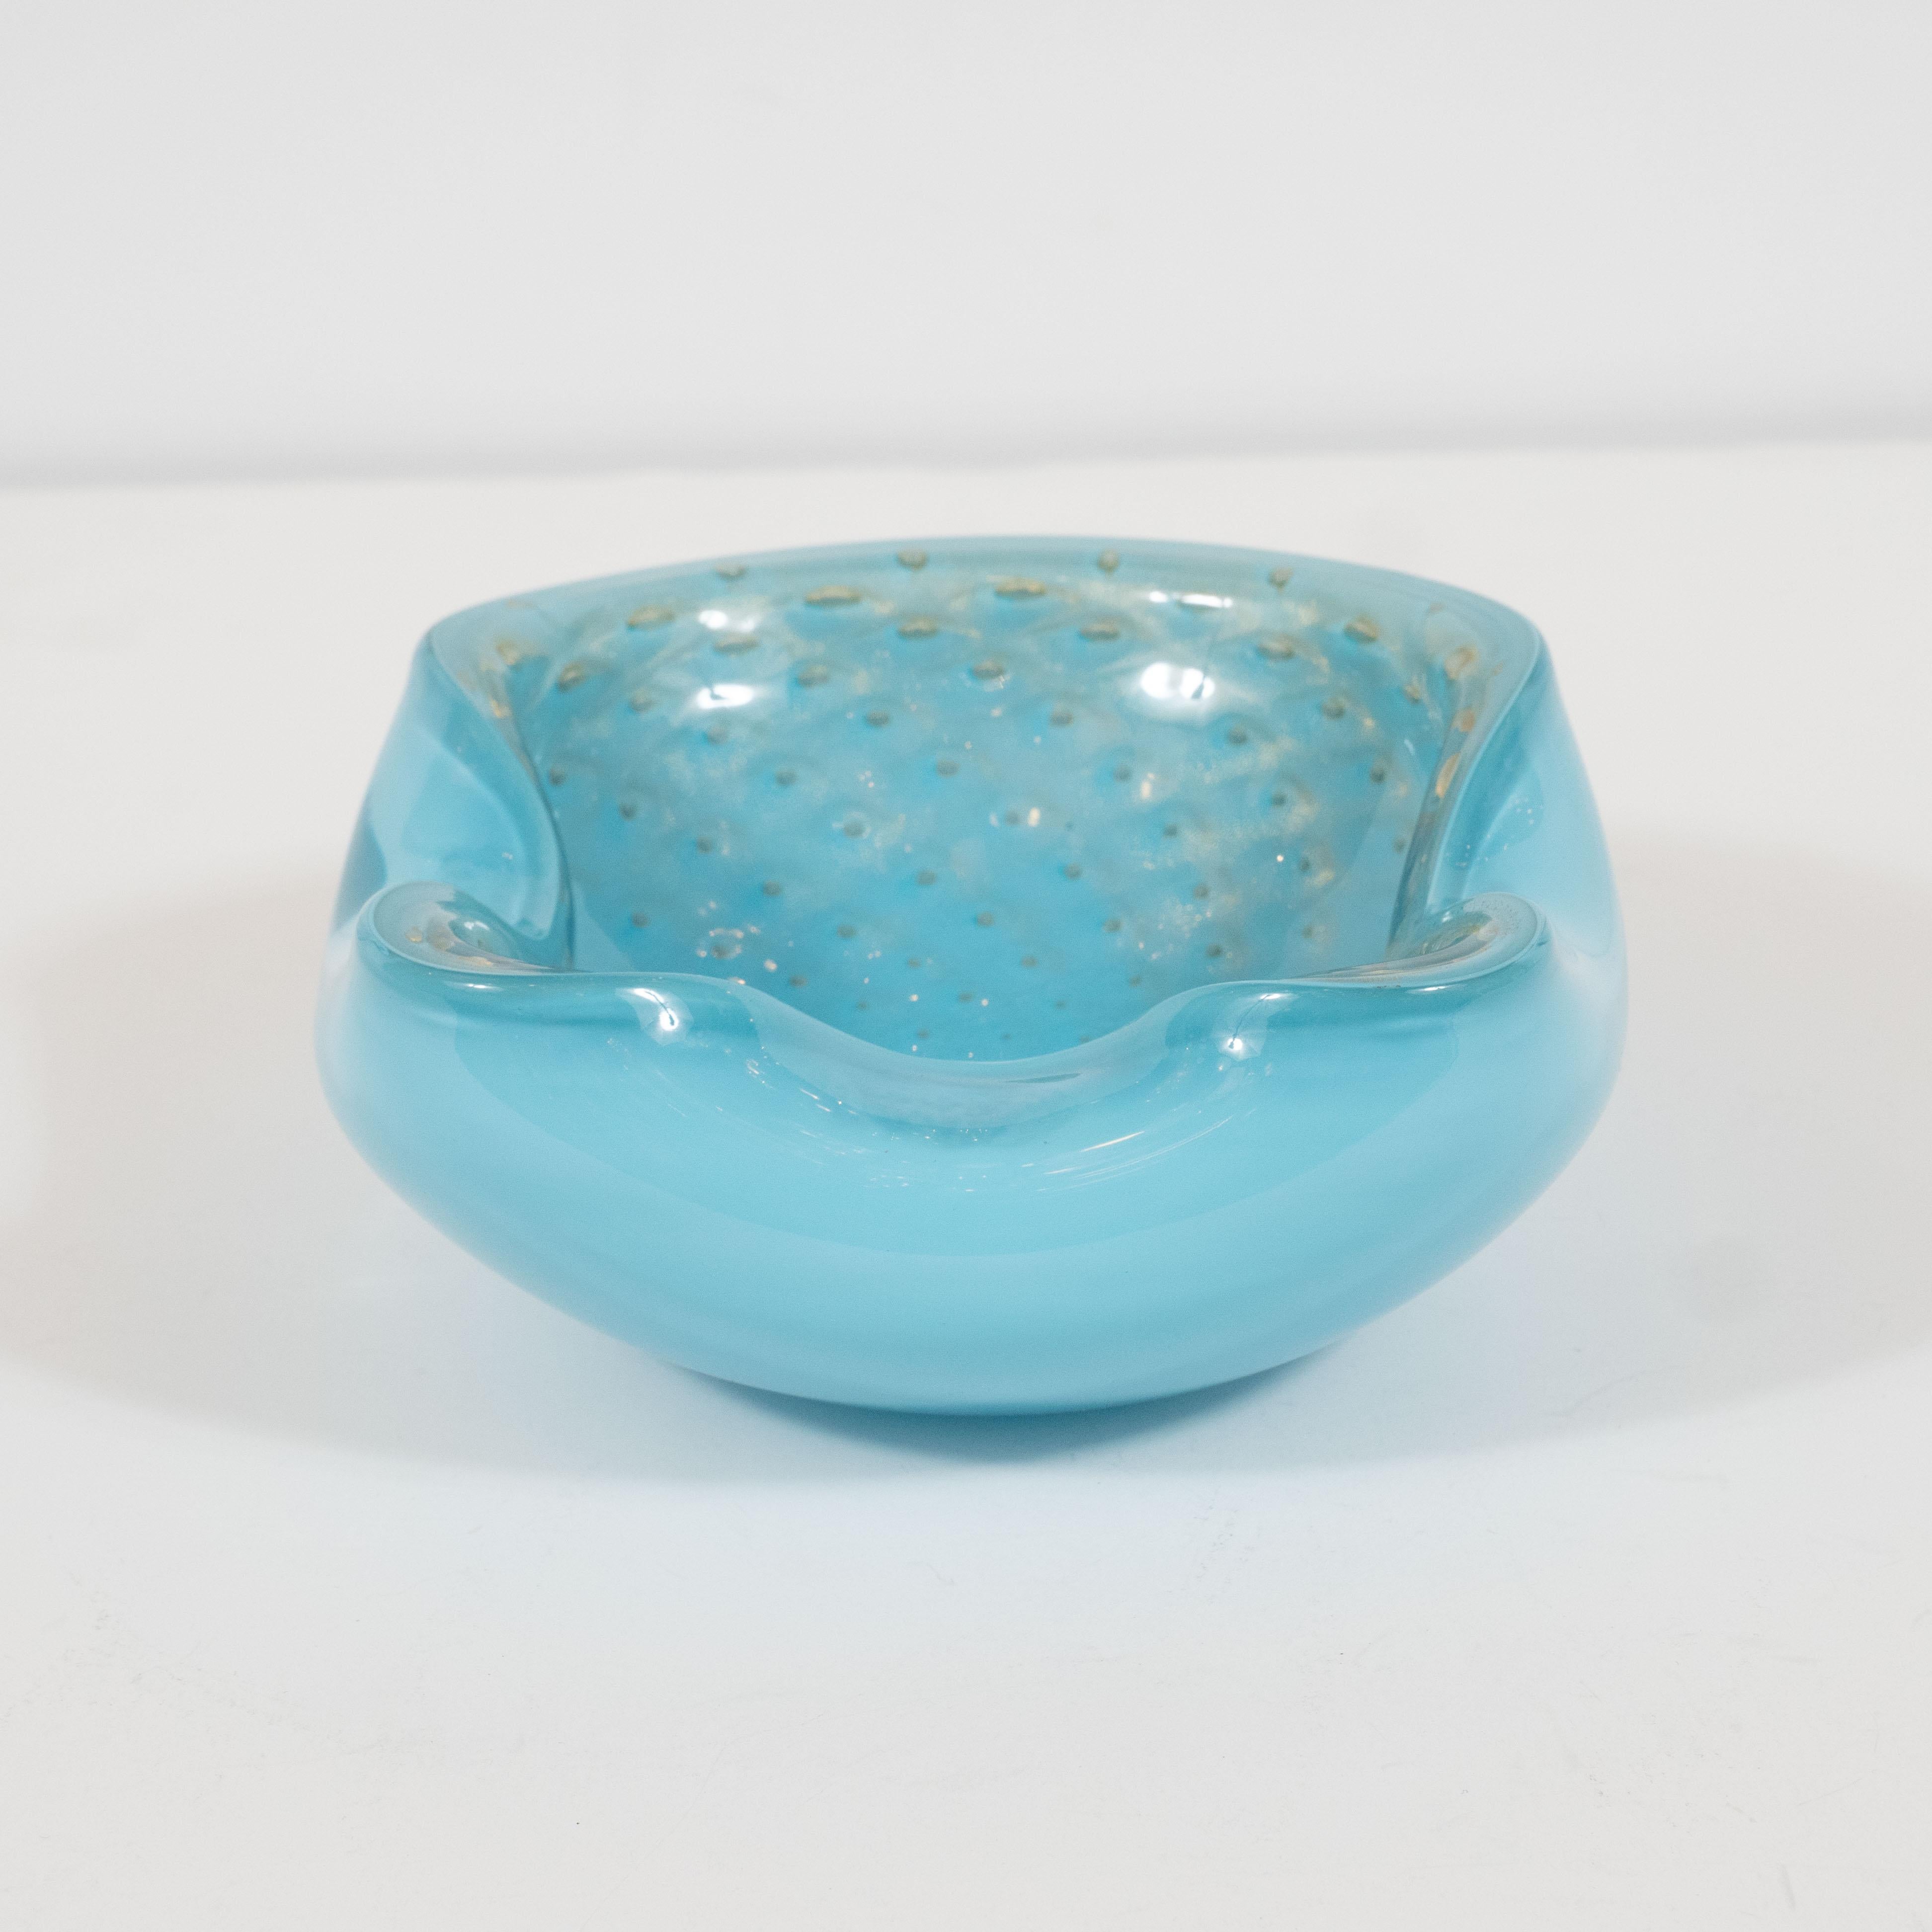 This stunning Mid-Century Modern decorative bowl/ash tray was hand blown in Murano, Italy- the island off the coast of Venice renowned for its superlative glass production. It features crimped sides- imbuing the piece with sinuous curves and a